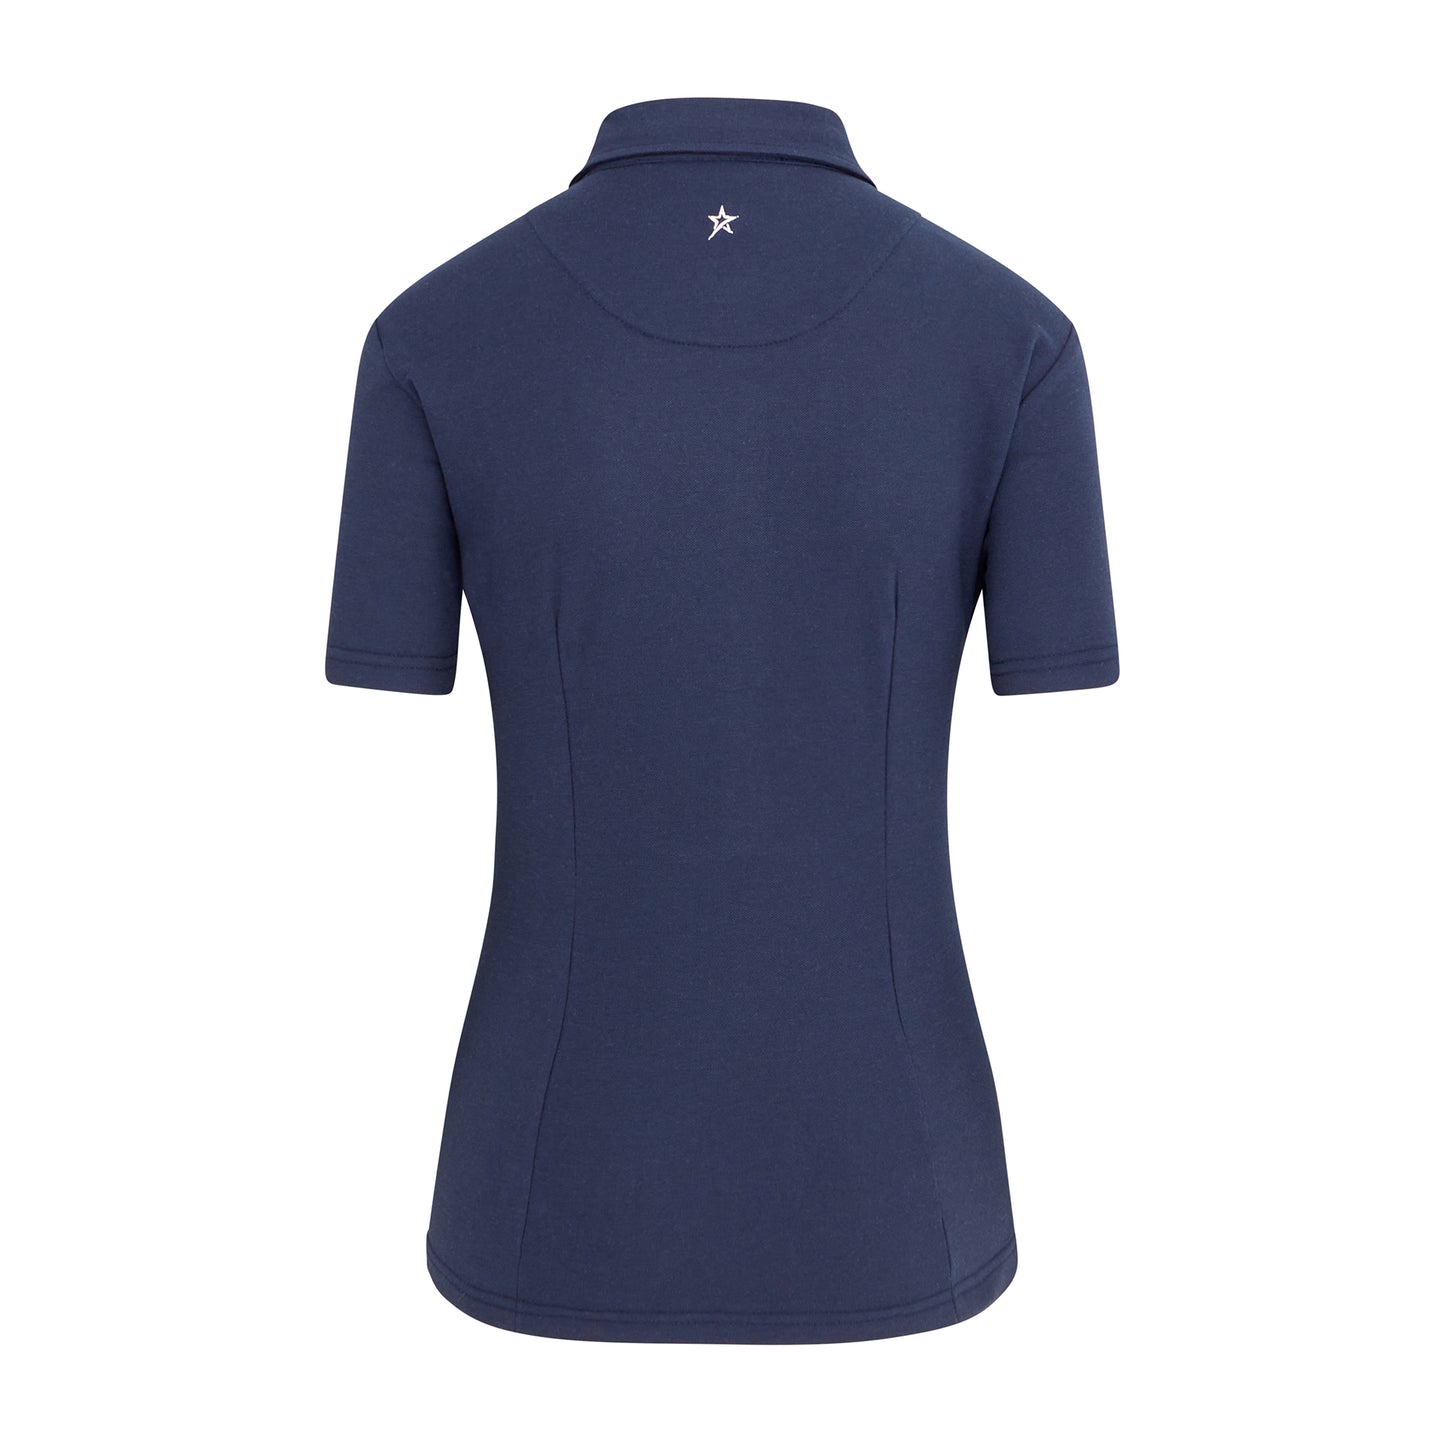 Swing Out Sister Ladies Short Sleeve Polo Shirt with Soft Cotton Finish in Navy Blue